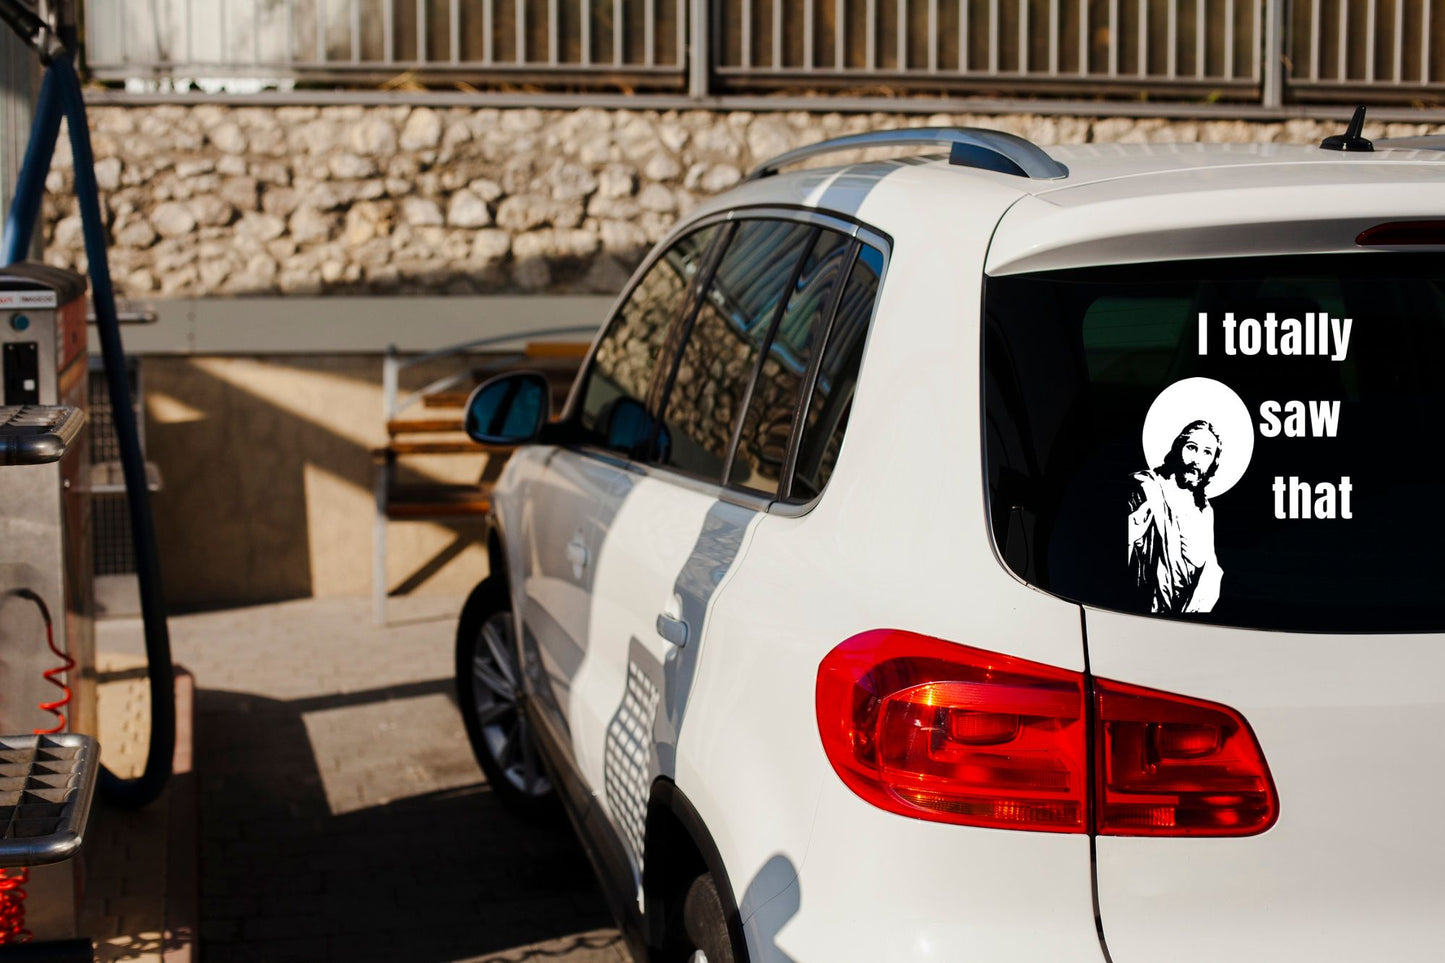 Jesus - I totally saw that - Vinyl decal. car decal funny stickers jesus jesus meme truck decals window decal